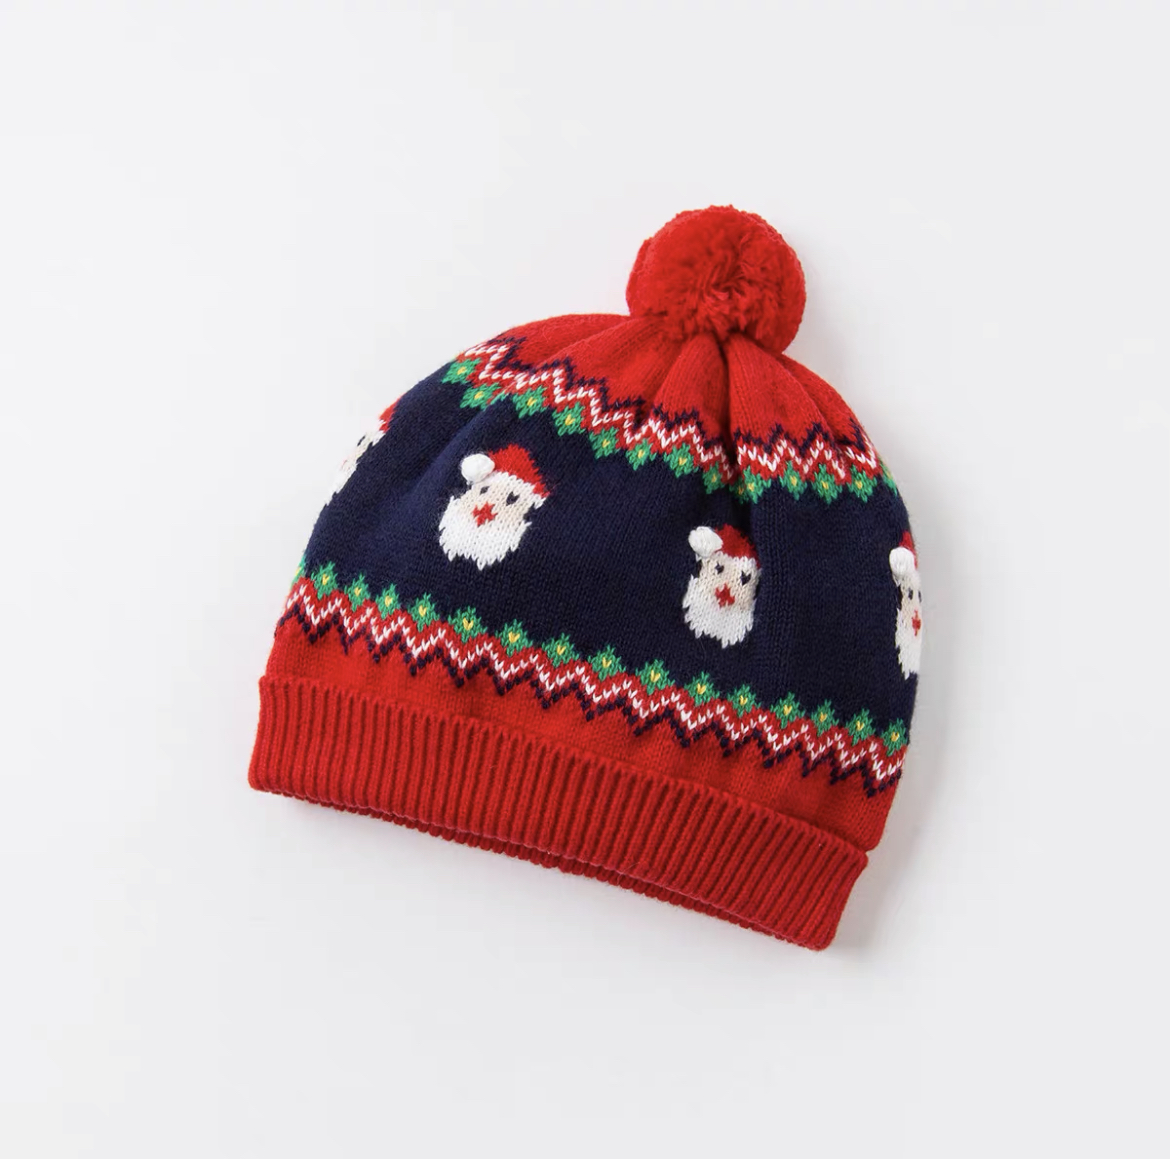 Winter Warm Ear Protector Knitted Hat Santa Claus Wool Ball Cap Color Can Be Customized